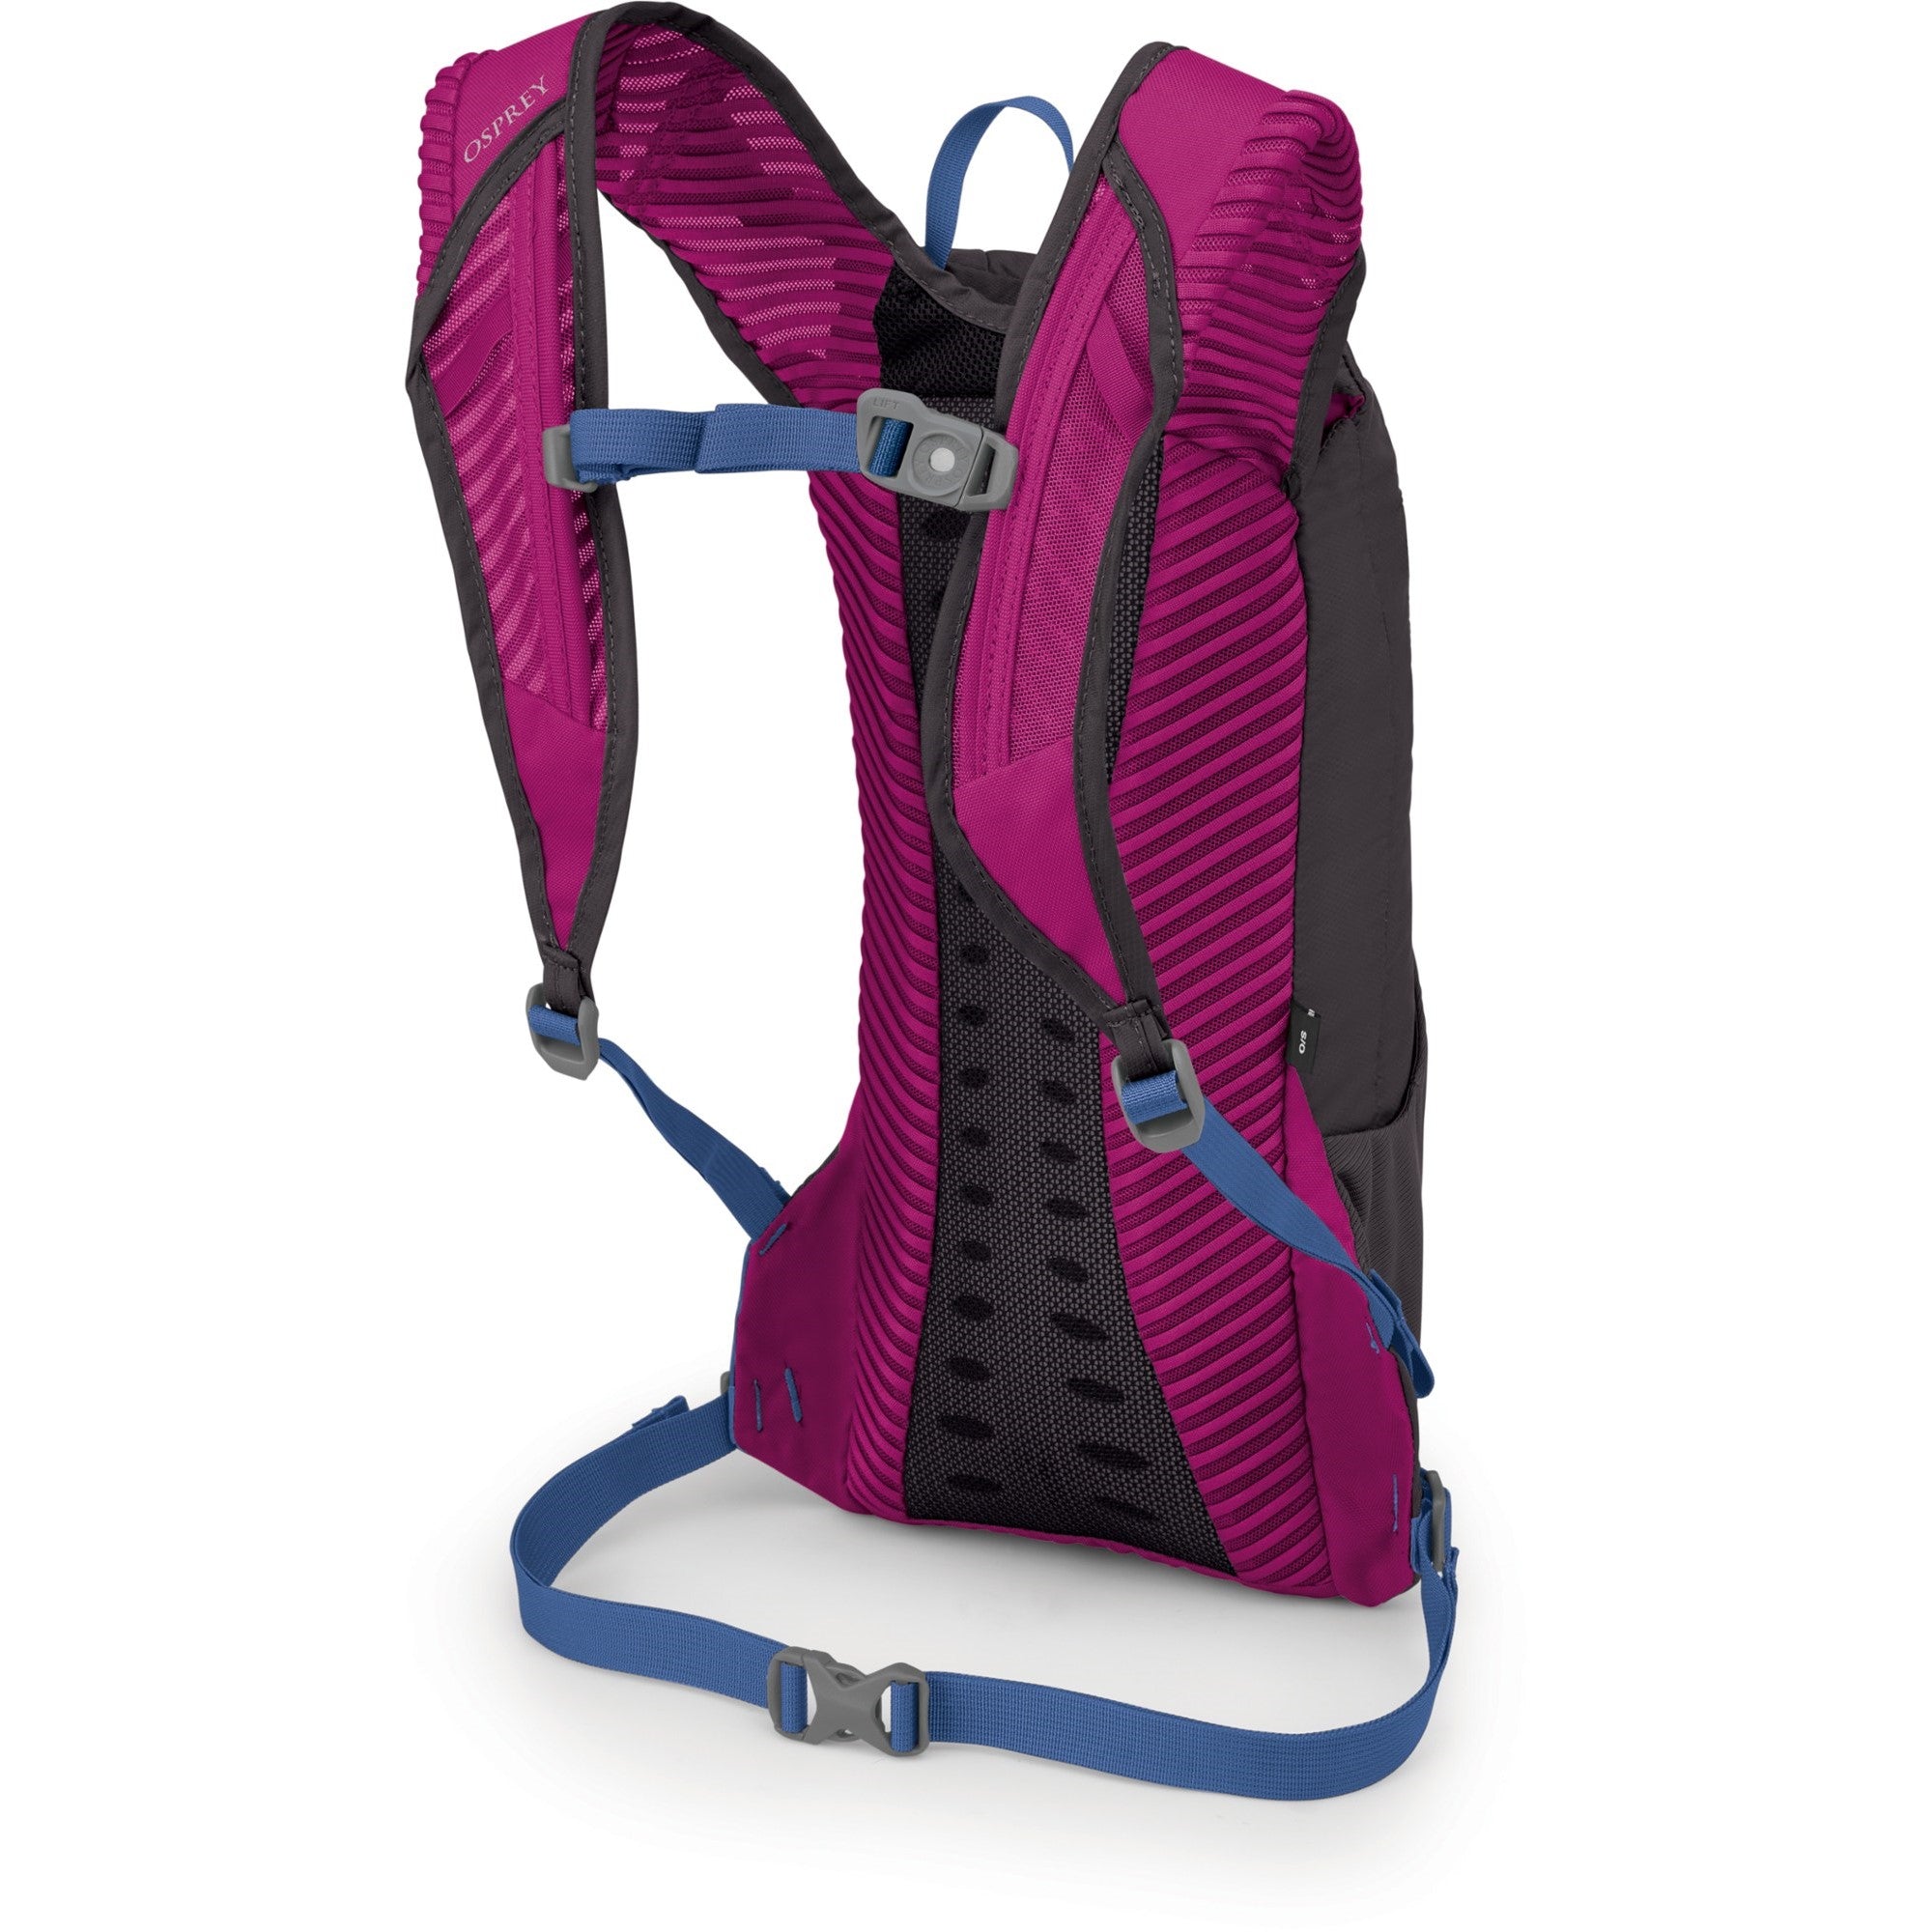 Kitsuma 7 Womens Hydration Pack Forests, and Treasures